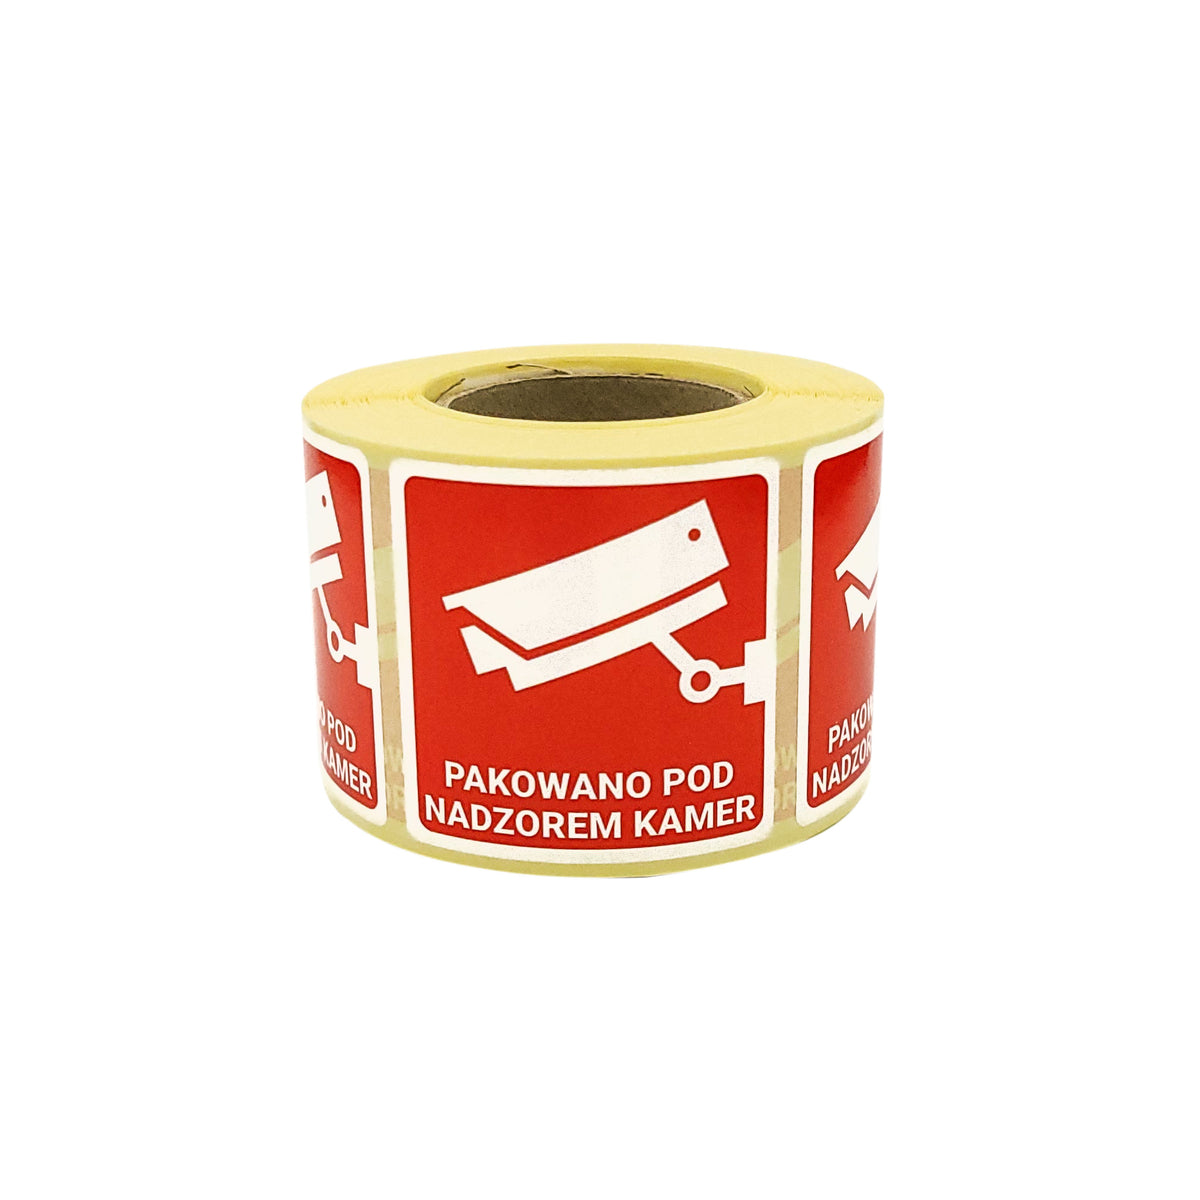 Self-adhesive warning labels - Packaged under camera surveillance! - 50x50mm 500 per roll